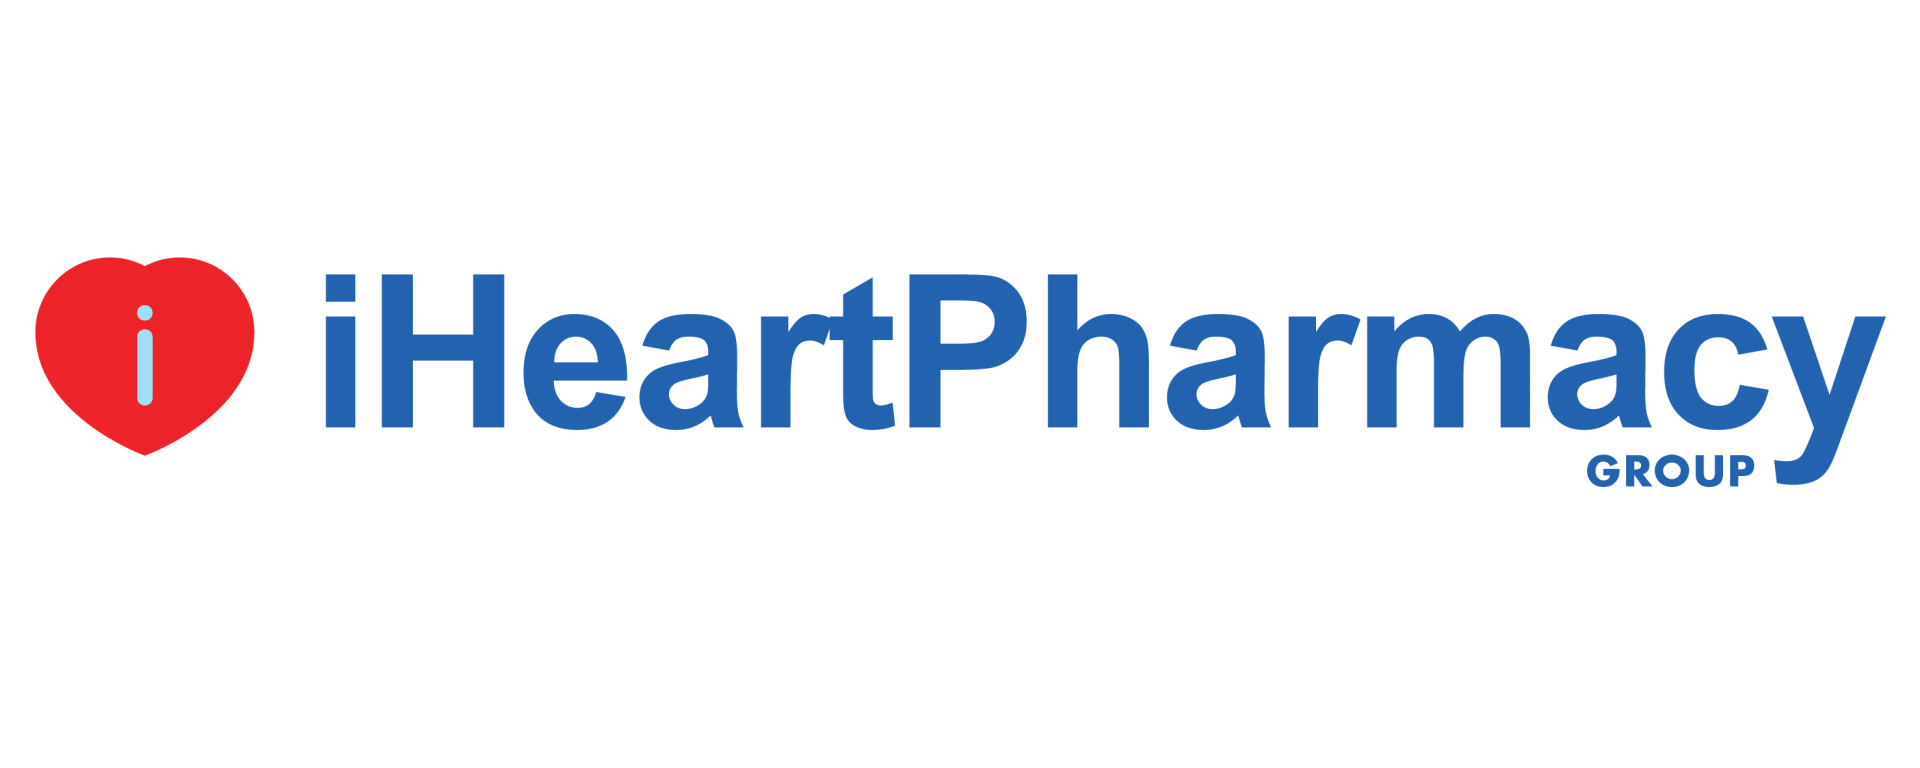 iHeartPharmacy Group